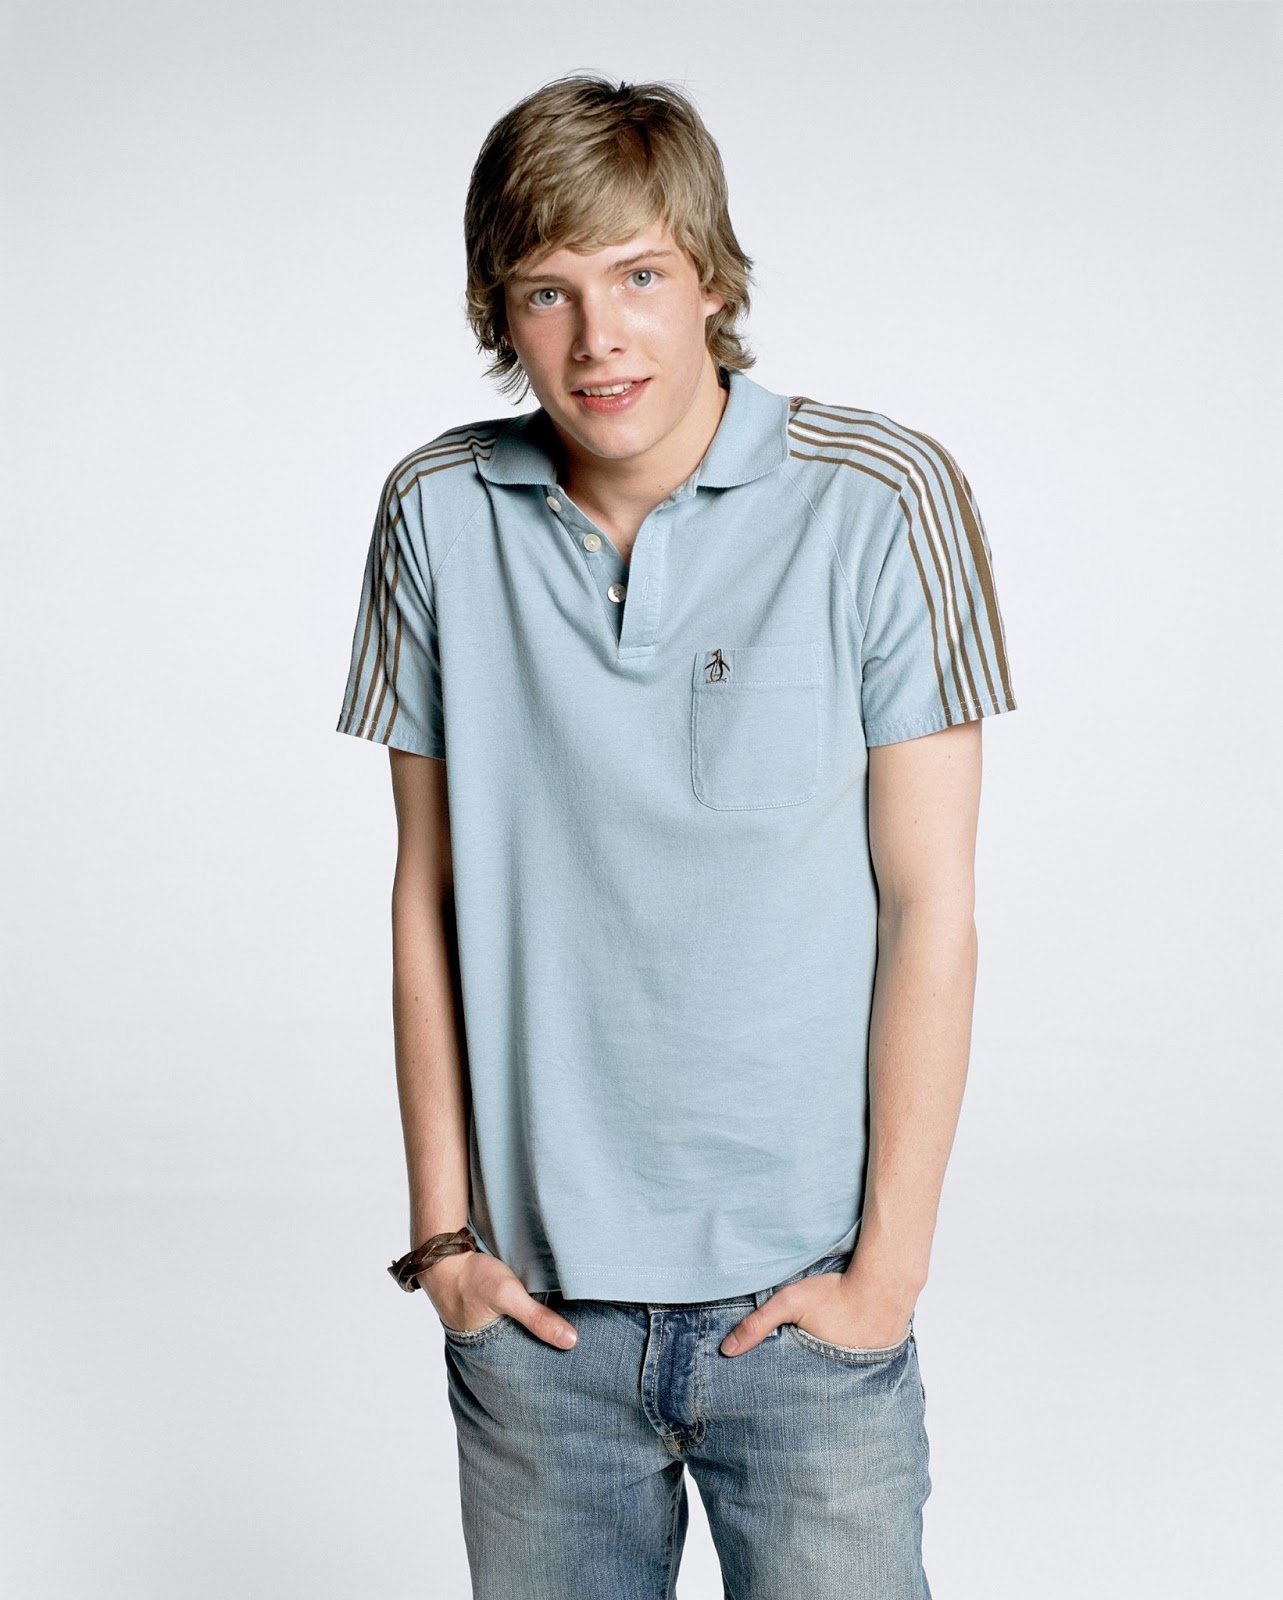 Hunter Parrish Photos | Tv Series Posters and Cast